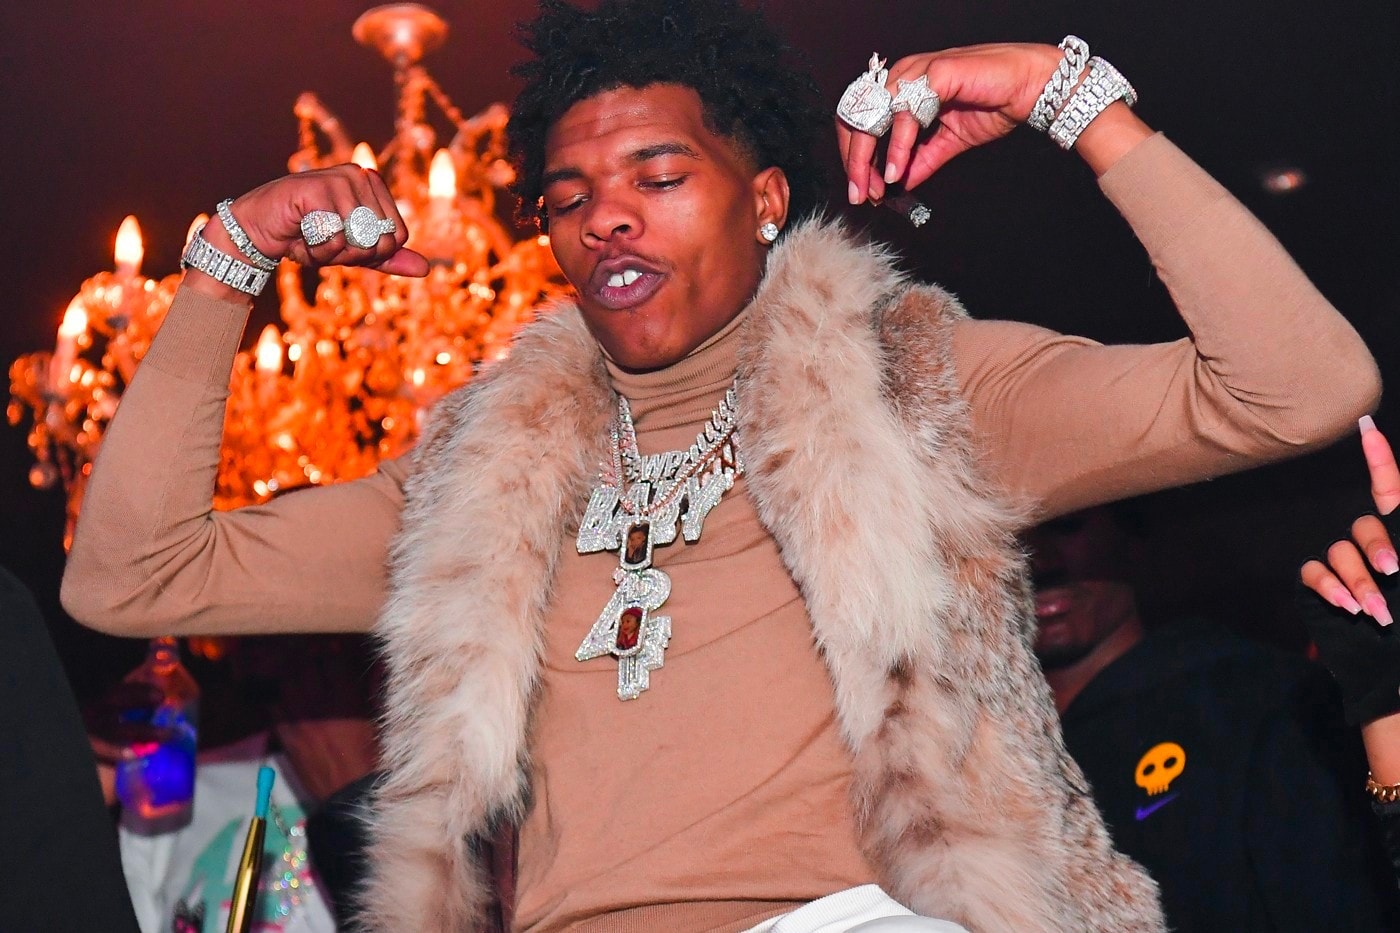 Lil Baby Shares Unreleased Bubbly young thug drake travis scott collab Verse punk